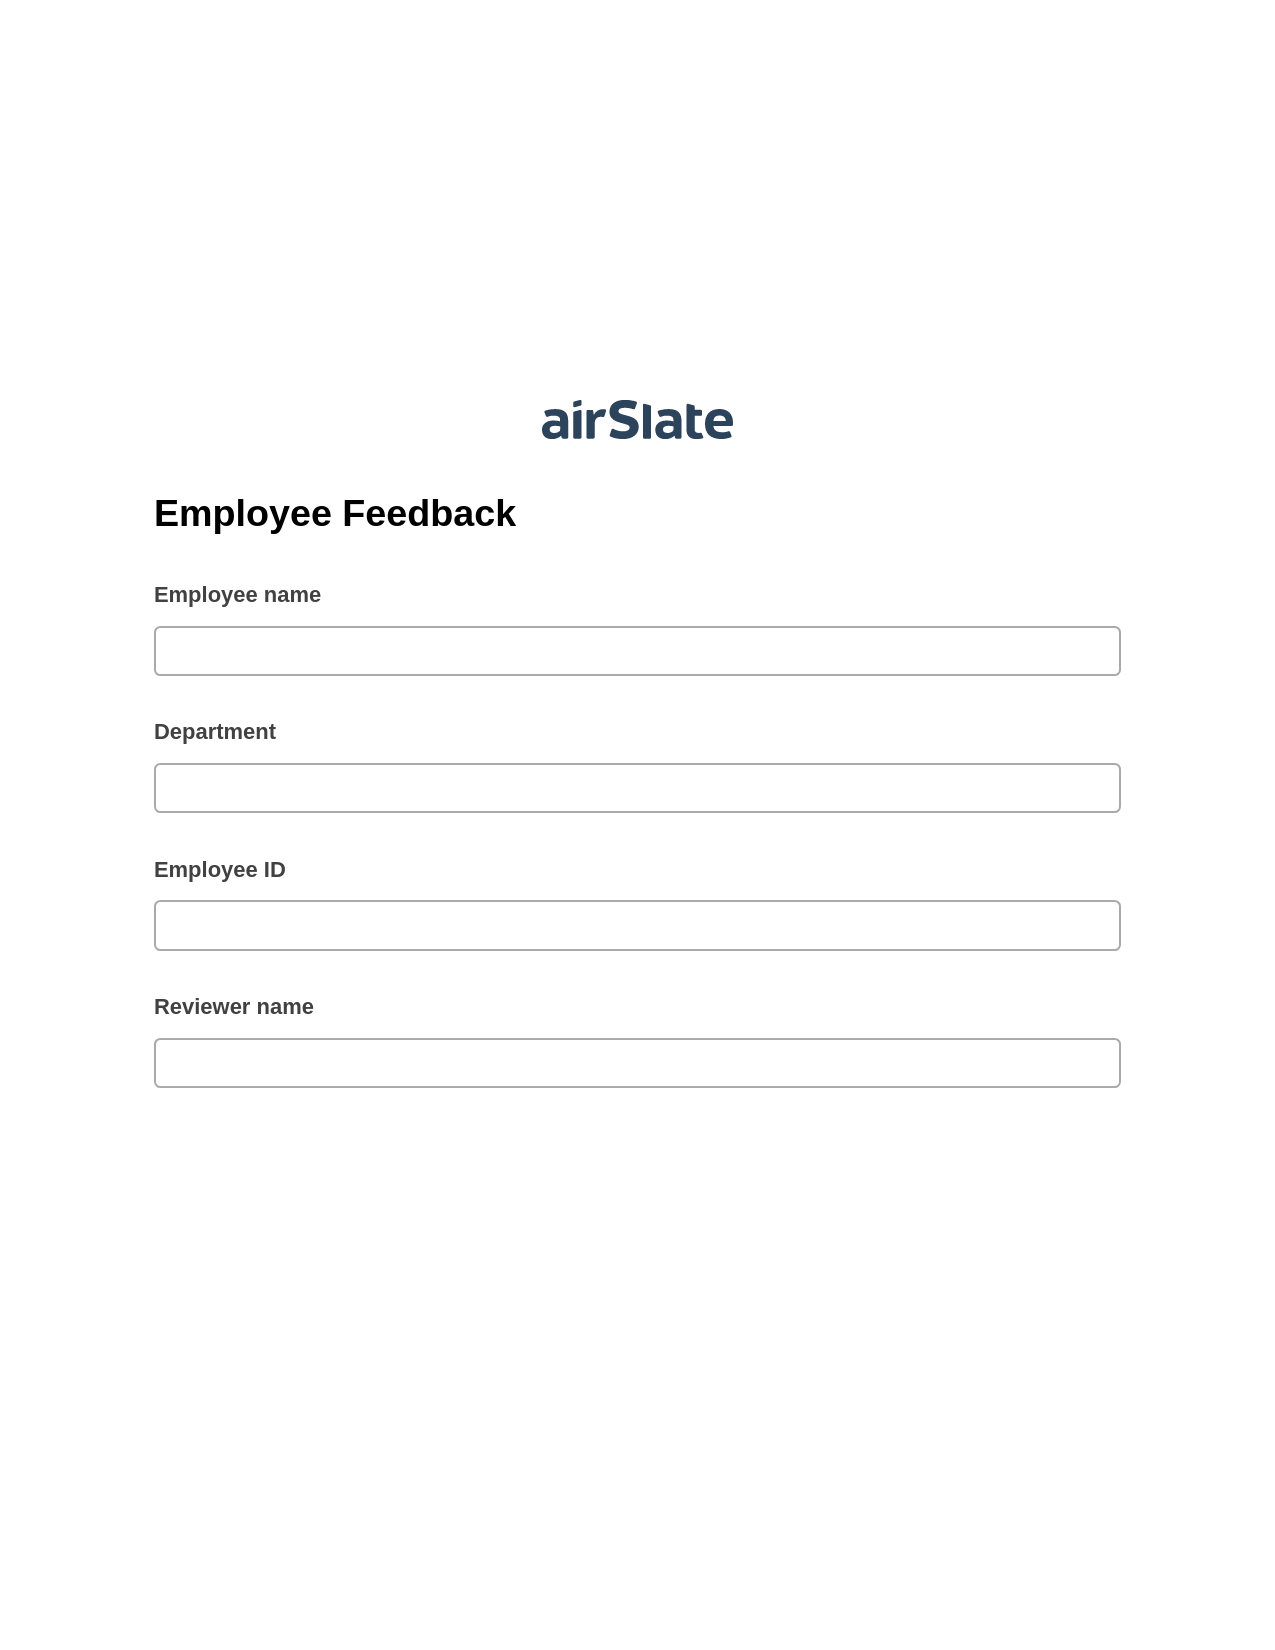 Employee Feedback Pre-fill from Salesforce Record Bot, Assign Roles to Recipients Bot, Archive to SharePoint Folder Bot